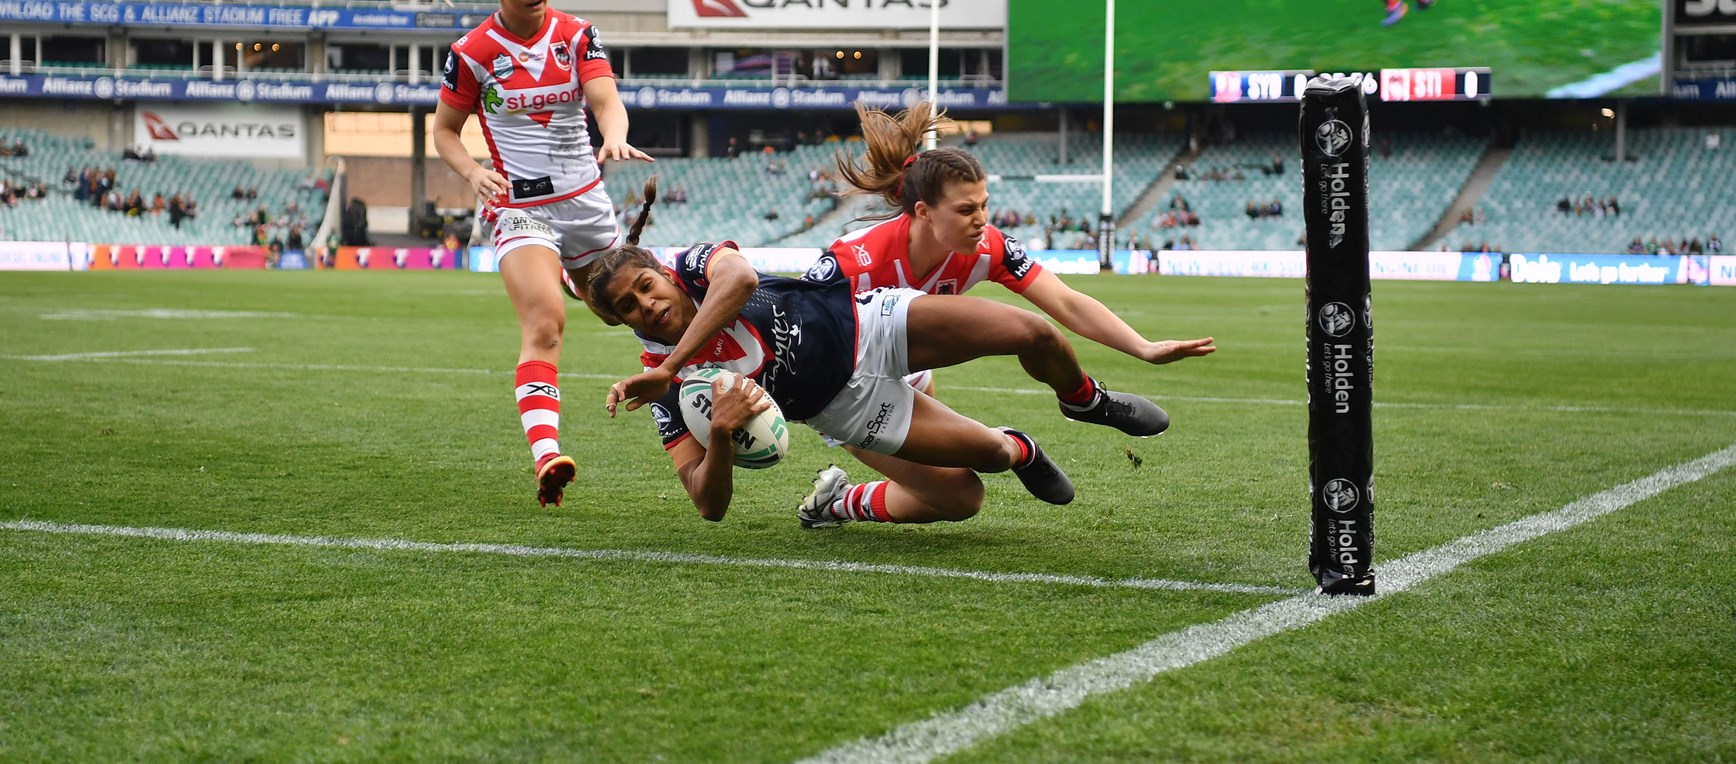 NRLW Roosters: Best photos of 2018